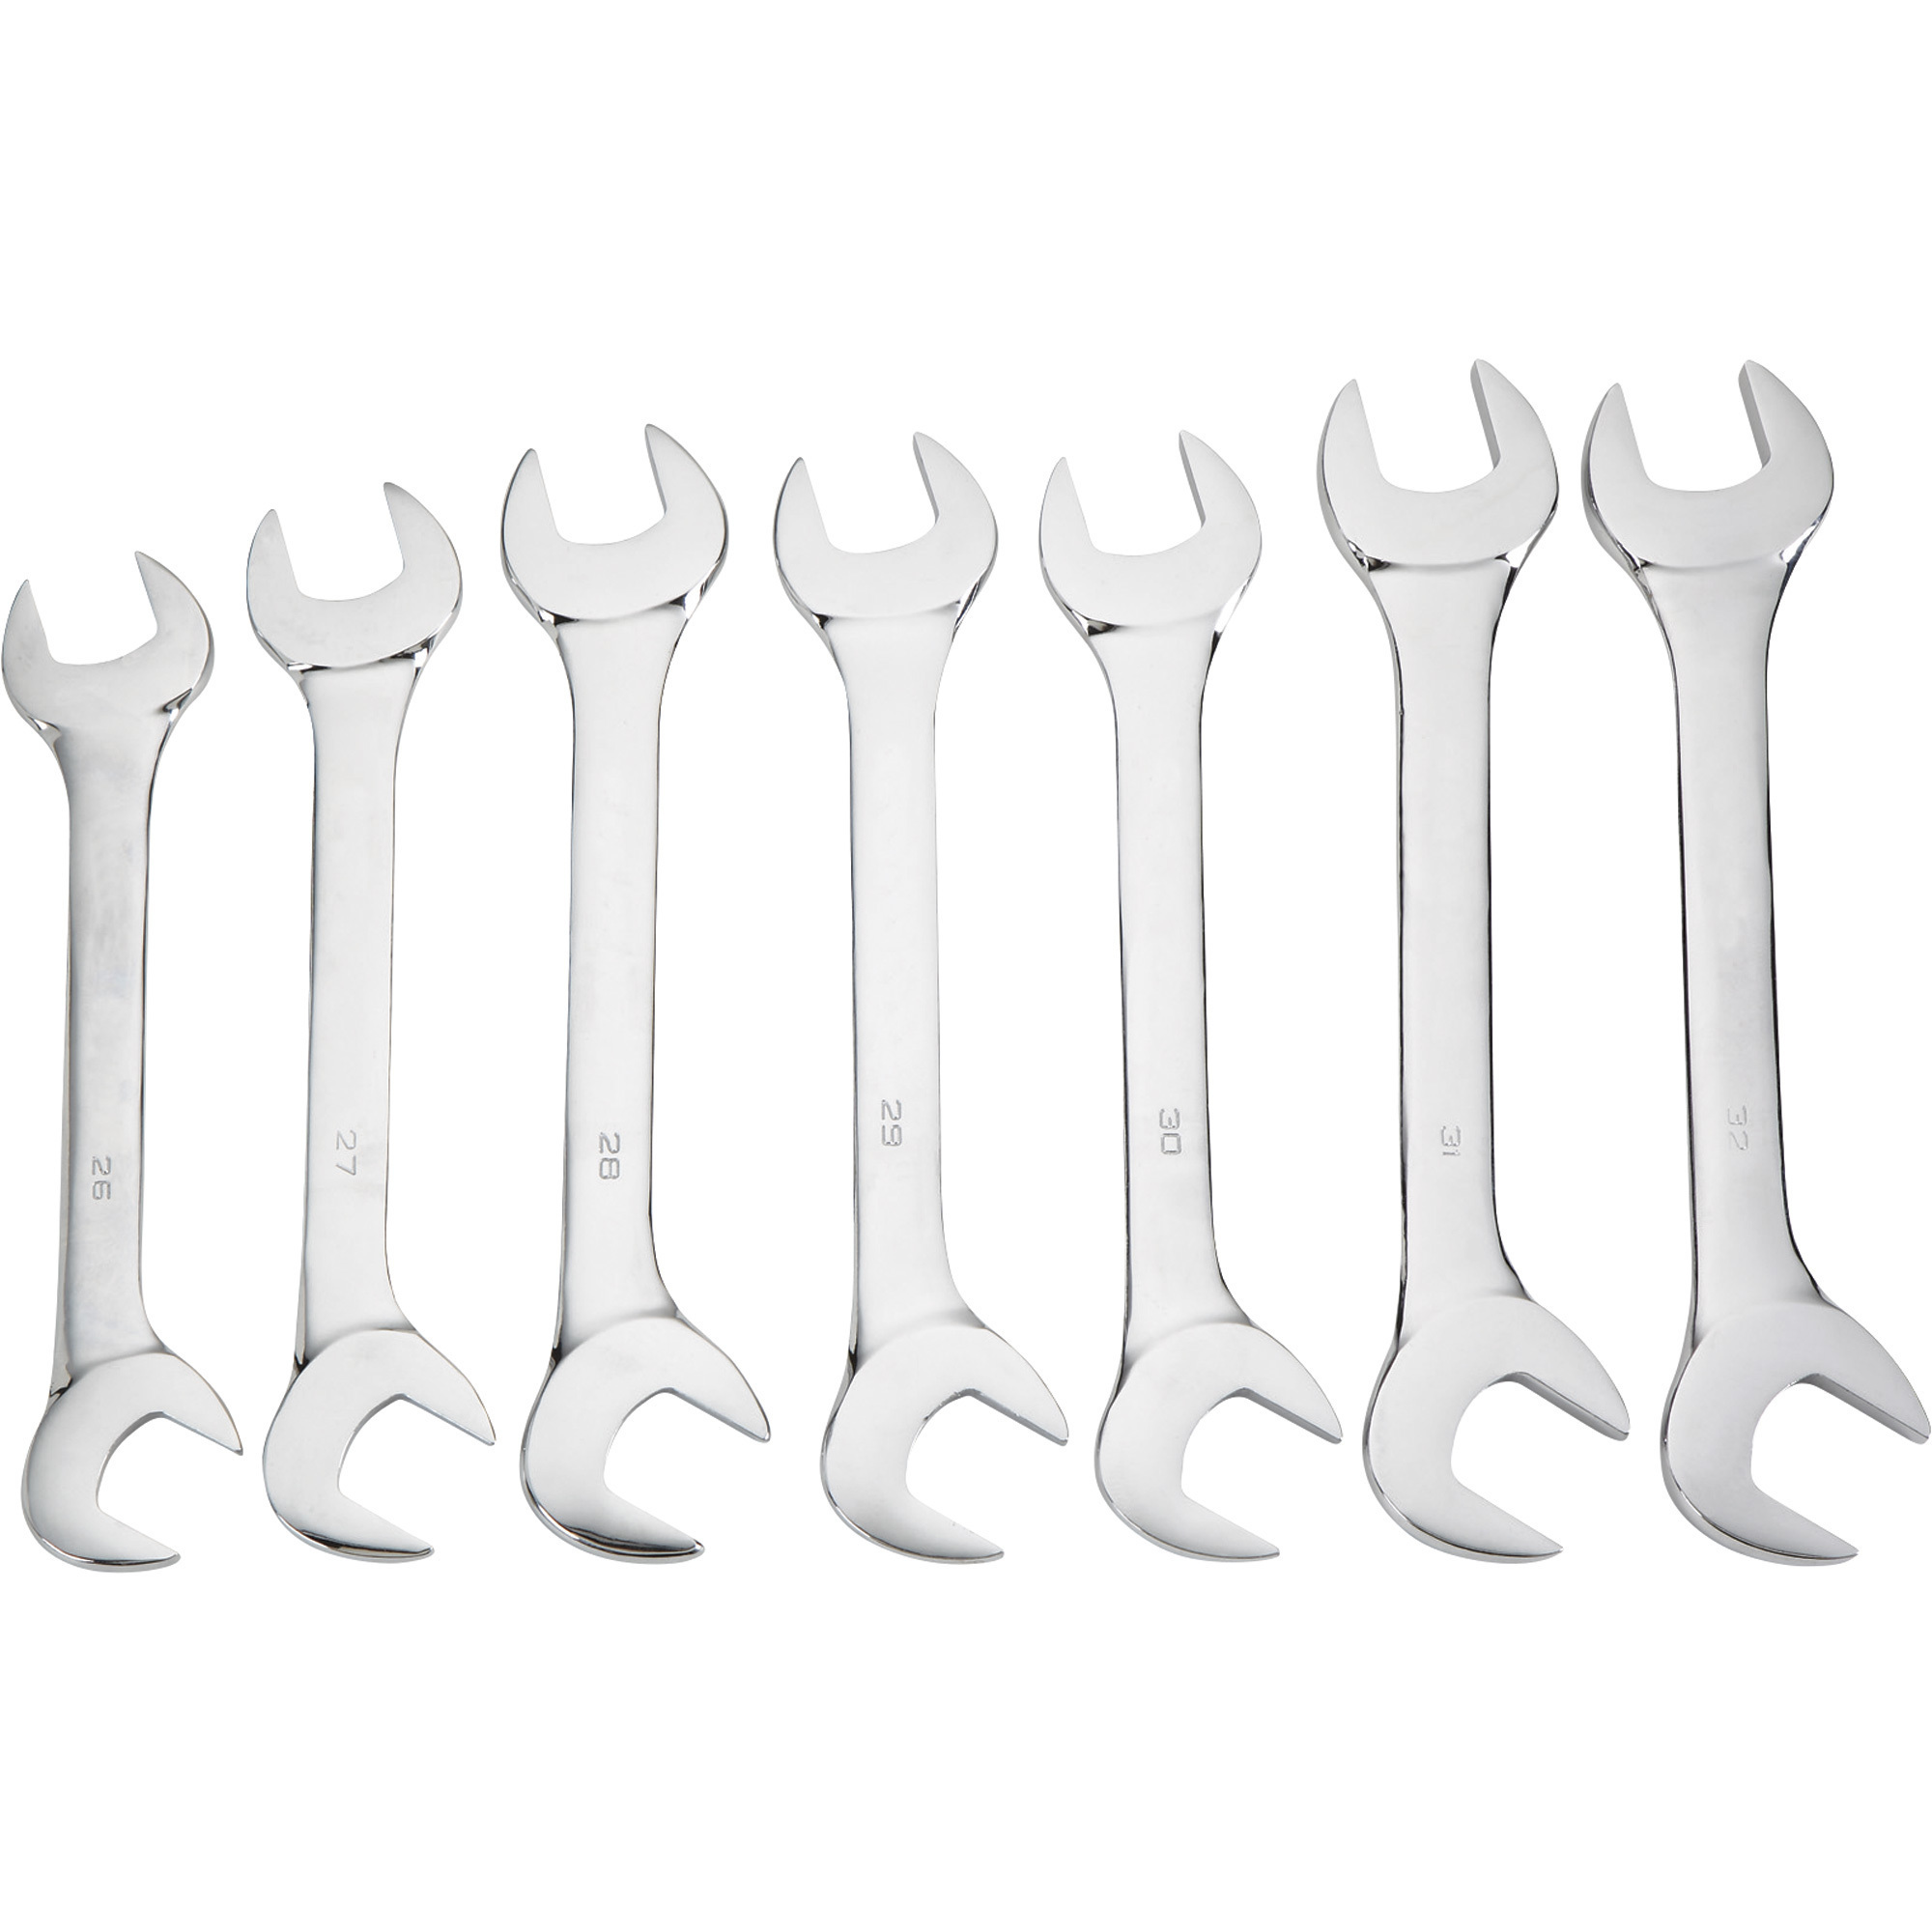 Klutch Angle Combination Wrench Set, 7-Piece, Metric